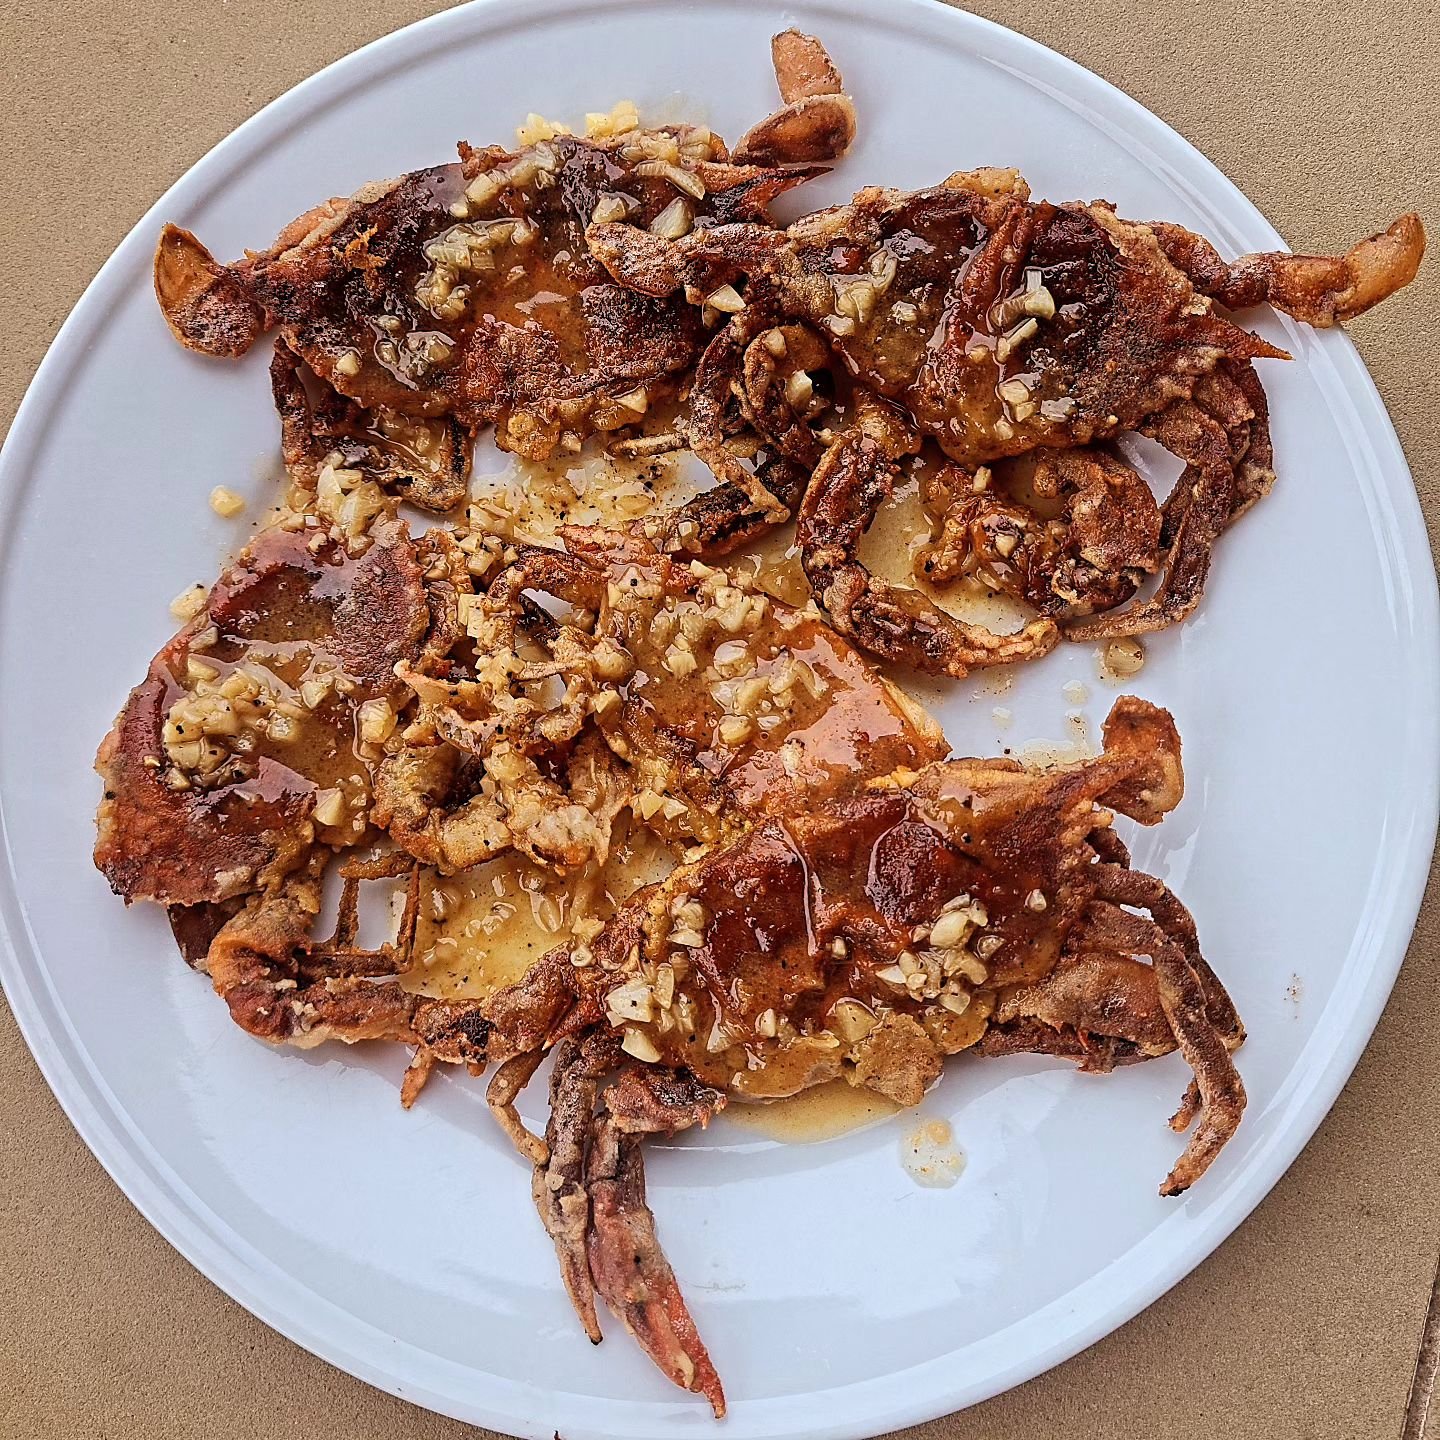 Join us at the Jersey Shore in July! Travel cost is cheap - you only have to go as far as Dry Comal Creek Vineyards😊 Soft shell crabs, Jersey Shore style, are the star of this class, but the entire menu is crazy good and perfect for summer.  This, a